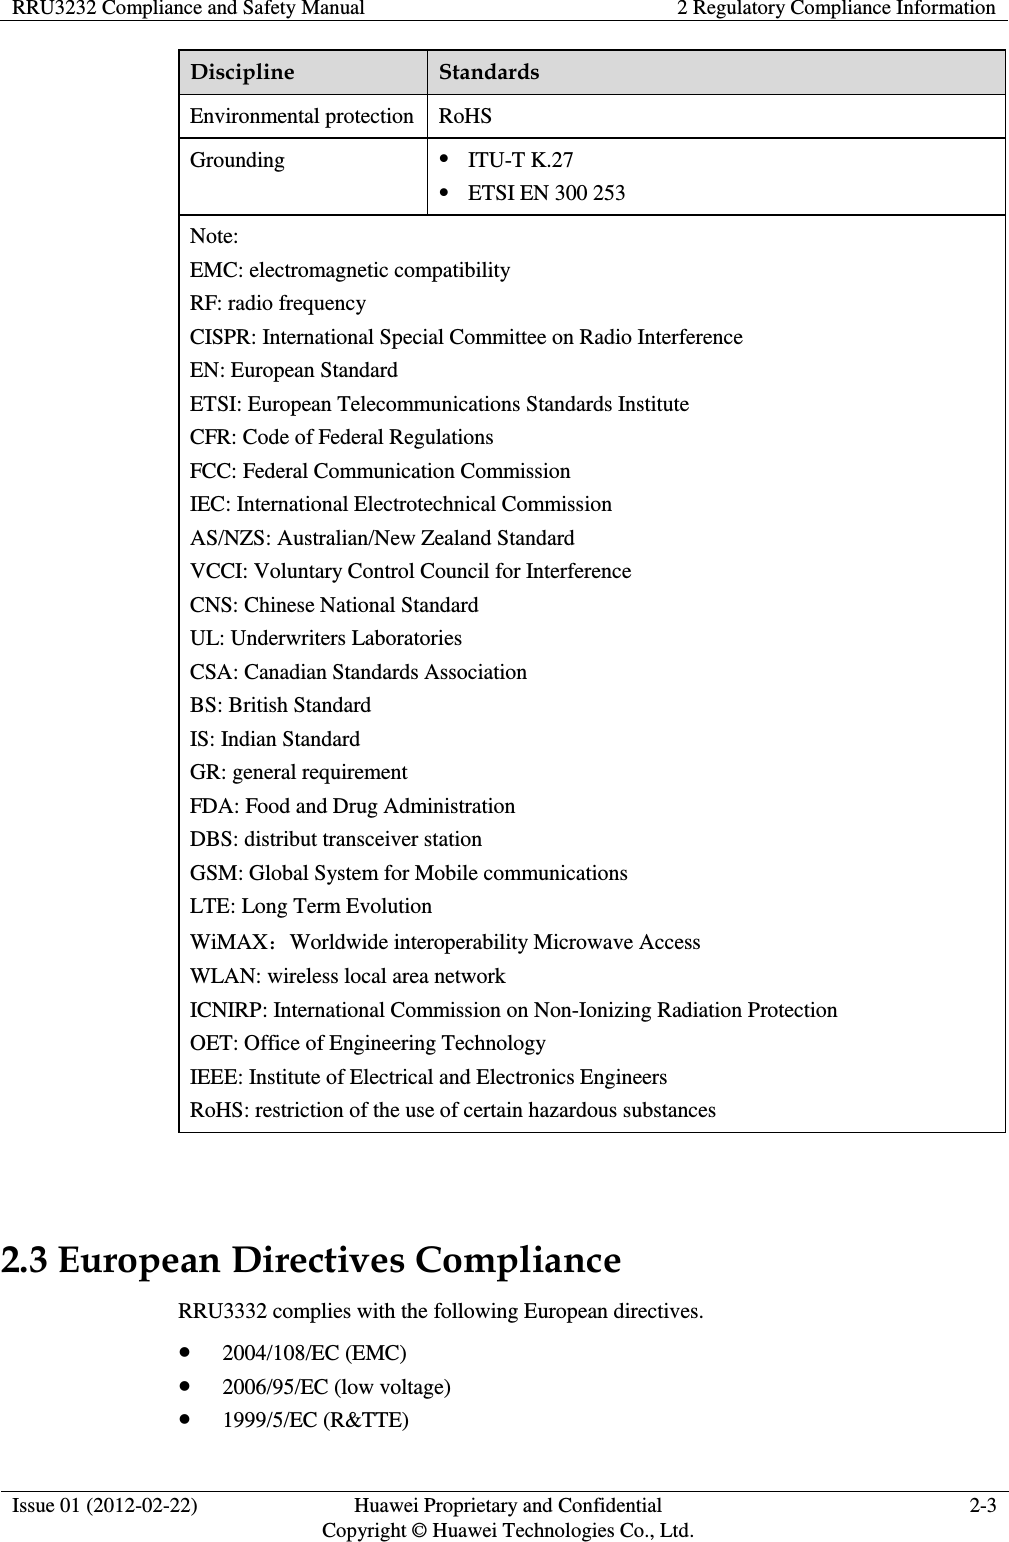 RRU3232 Compliance and Safety Manual 2 Regulatory Compliance Information  Issue 01 (2012-02-22) Huawei Proprietary and Confidential         Copyright © Huawei Technologies Co., Ltd. 2-3  Discipline Standards Environmental protection RoHS Grounding  ITU-T K.27  ETSI EN 300 253 Note: EMC: electromagnetic compatibility RF: radio frequency CISPR: International Special Committee on Radio Interference EN: European Standard ETSI: European Telecommunications Standards Institute CFR: Code of Federal Regulations FCC: Federal Communication Commission IEC: International Electrotechnical Commission AS/NZS: Australian/New Zealand Standard VCCI: Voluntary Control Council for Interference CNS: Chinese National Standard UL: Underwriters Laboratories CSA: Canadian Standards Association BS: British Standard IS: Indian Standard GR: general requirement FDA: Food and Drug Administration DBS: distribut transceiver station GSM: Global System for Mobile communications LTE: Long Term Evolution WiMAX：Worldwide interoperability Microwave Access WLAN: wireless local area network ICNIRP: International Commission on Non-Ionizing Radiation Protection OET: Office of Engineering Technology IEEE: Institute of Electrical and Electronics Engineers RoHS: restriction of the use of certain hazardous substances  2.3 European Directives Compliance RRU3332 complies with the following European directives.    2004/108/EC (EMC)  2006/95/EC (low voltage)  1999/5/EC (R&amp;TTE) 